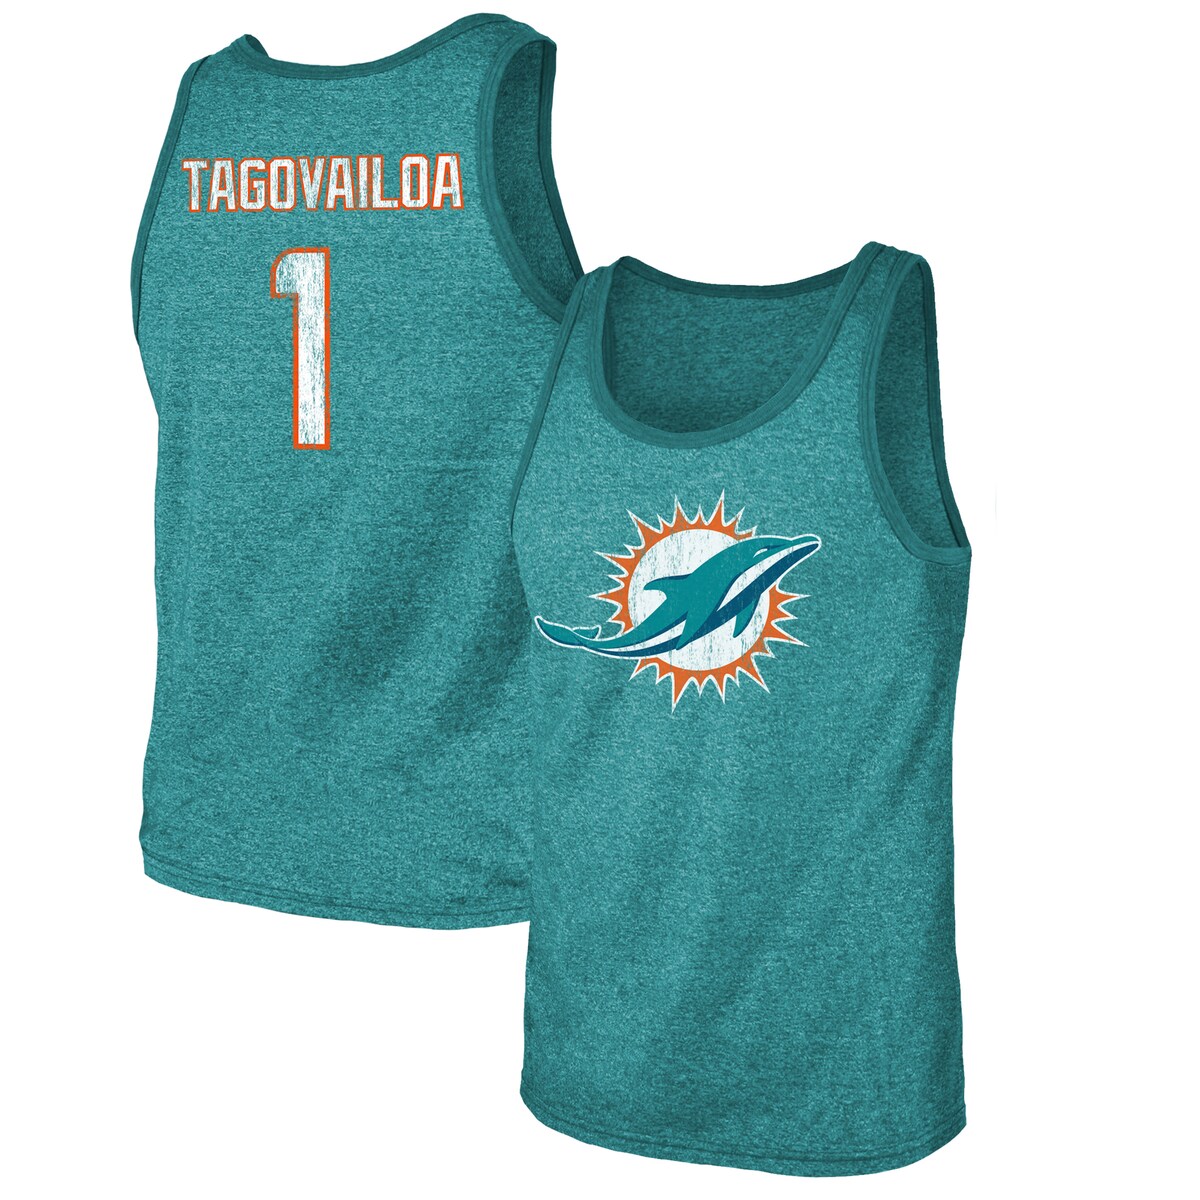 Tua Tagovailoa is your favorite player, and for good reason. Show him your support by grabbing this Miami Dolphins Name & Number Tri-Blend Tank Top from Fanatics Branded. It features bold Miami Dolphins and Tua Tagovailoa graphics, so no one will be able to question where your allegiance lies every time you rock this sweet gear.Scoop neckSleevelessHeathered fabricScoop neckOfficially licensedSleevelessMachine wash, tumble dry lowMaterial: 50% Polyester/38% Cotton/12% RayonMade in the USADistressed screen print graphicsBrand: Majestic Threads